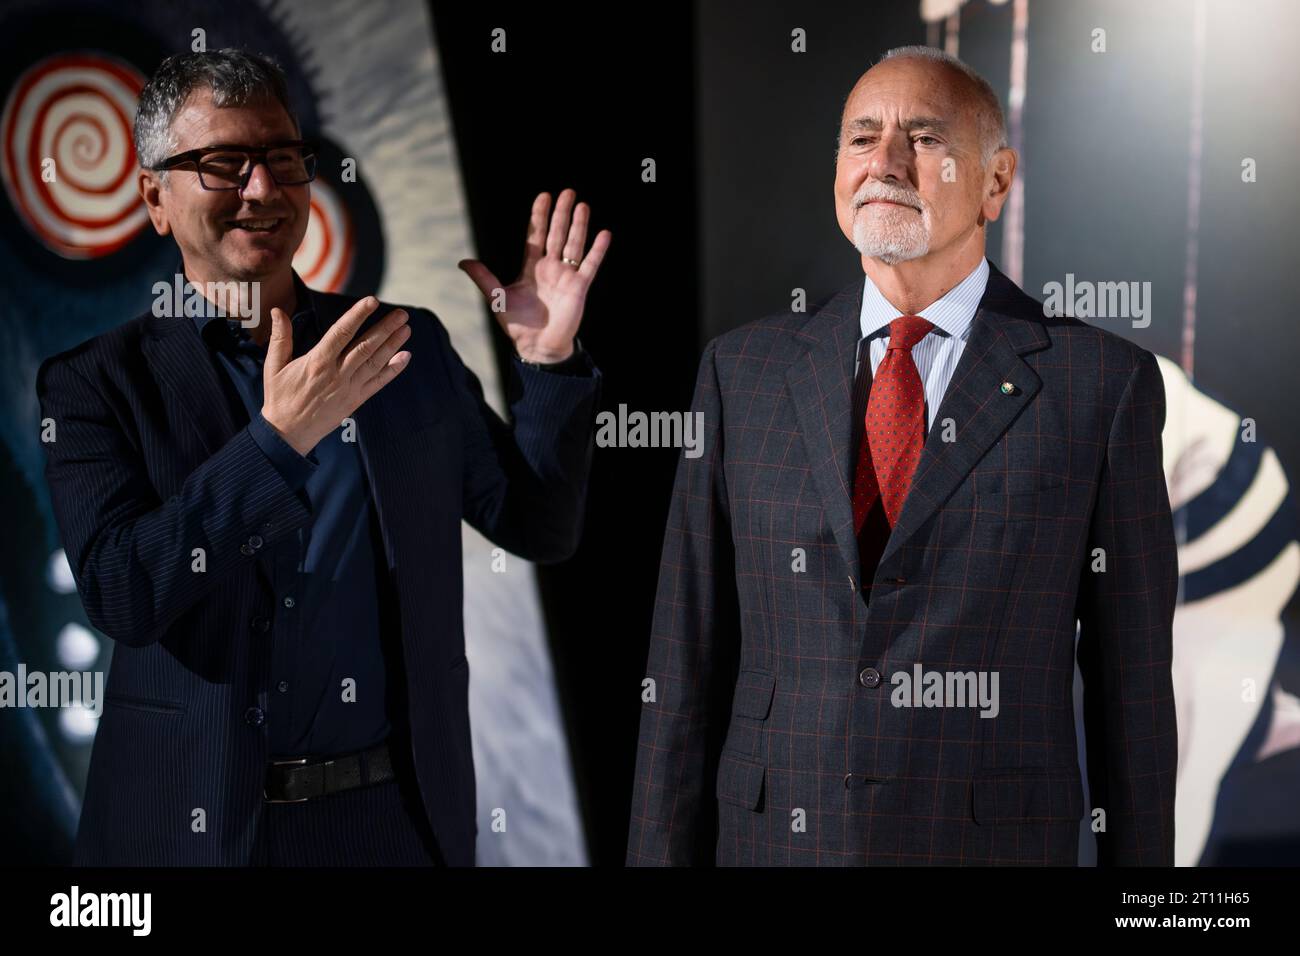 Turin, Italy. 10 October 2023. Domenico De Gaetano (L), director of National Cinema Museum, and Enzo Ghigo (R), president of National Cinema Museum, pose for a photo during a press conference for 'The World Of Tim Burton' exhibition opening. The exhibition will be on show at the Mole Antonelliana from 11 October 2023 to 7 April 2024. Credit: Nicolò Campo/Alamy Live News Stock Photo